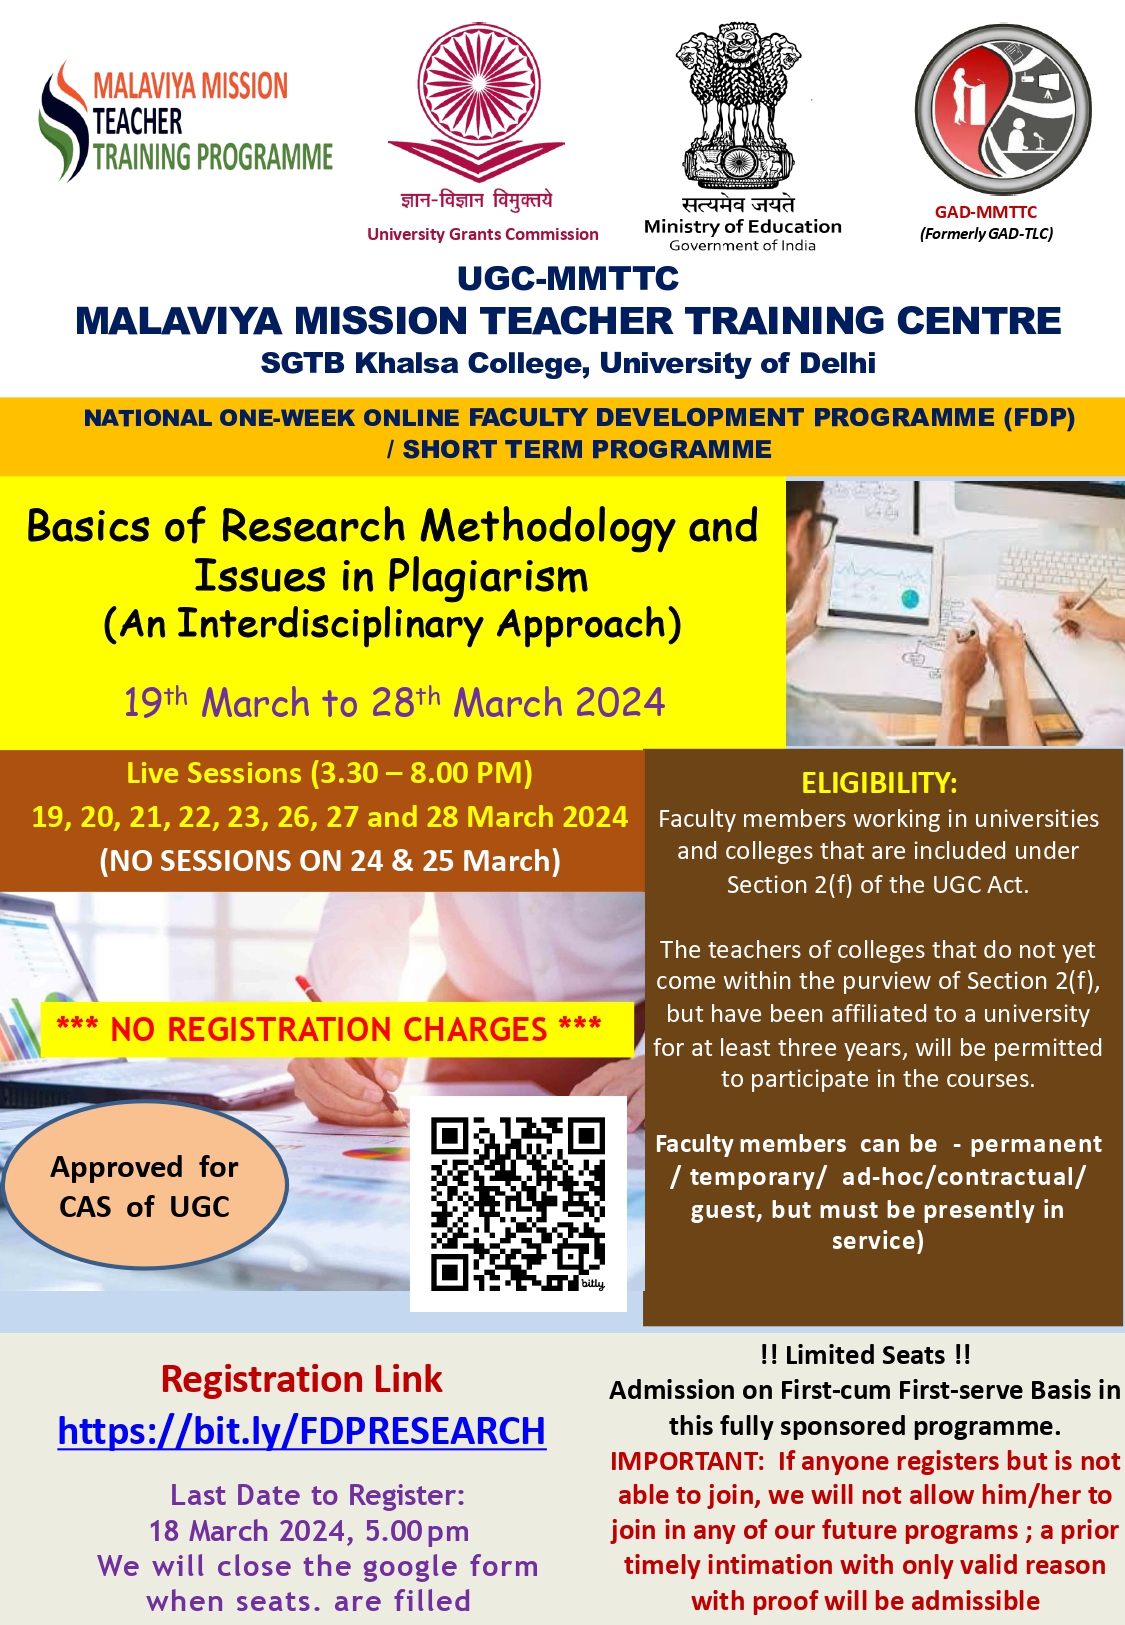 Course Image OFDP- Basics of Research Methodology and Issues in Plagiarism (An Interdisciplinary Approach)